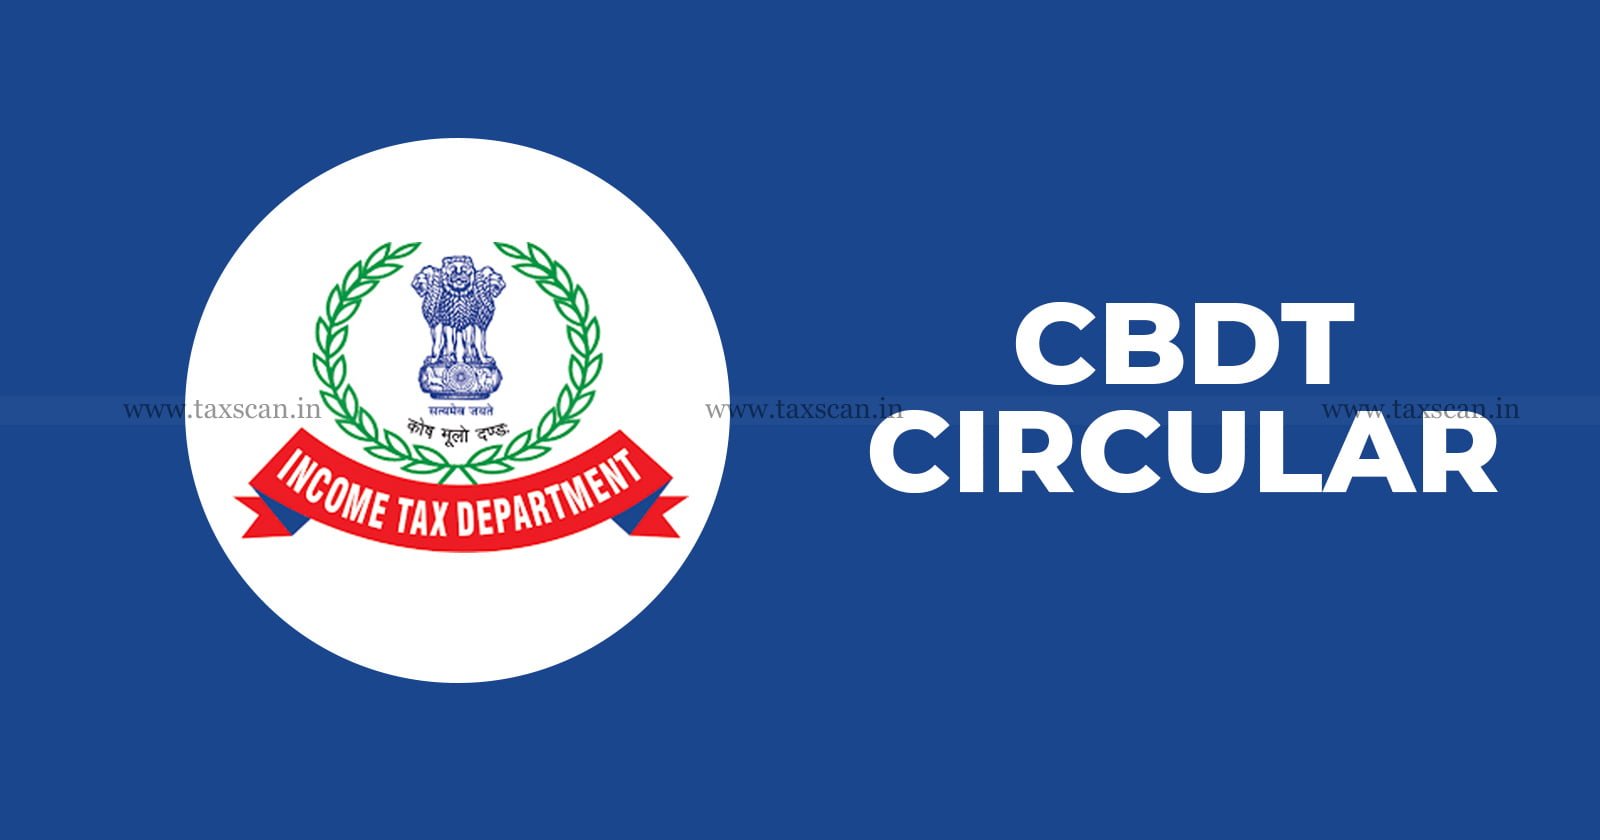 Application - Rejected - Apparent - Obvious - Mistakes - ITR - ITAT - CBDT - Circular - TAXSCAN